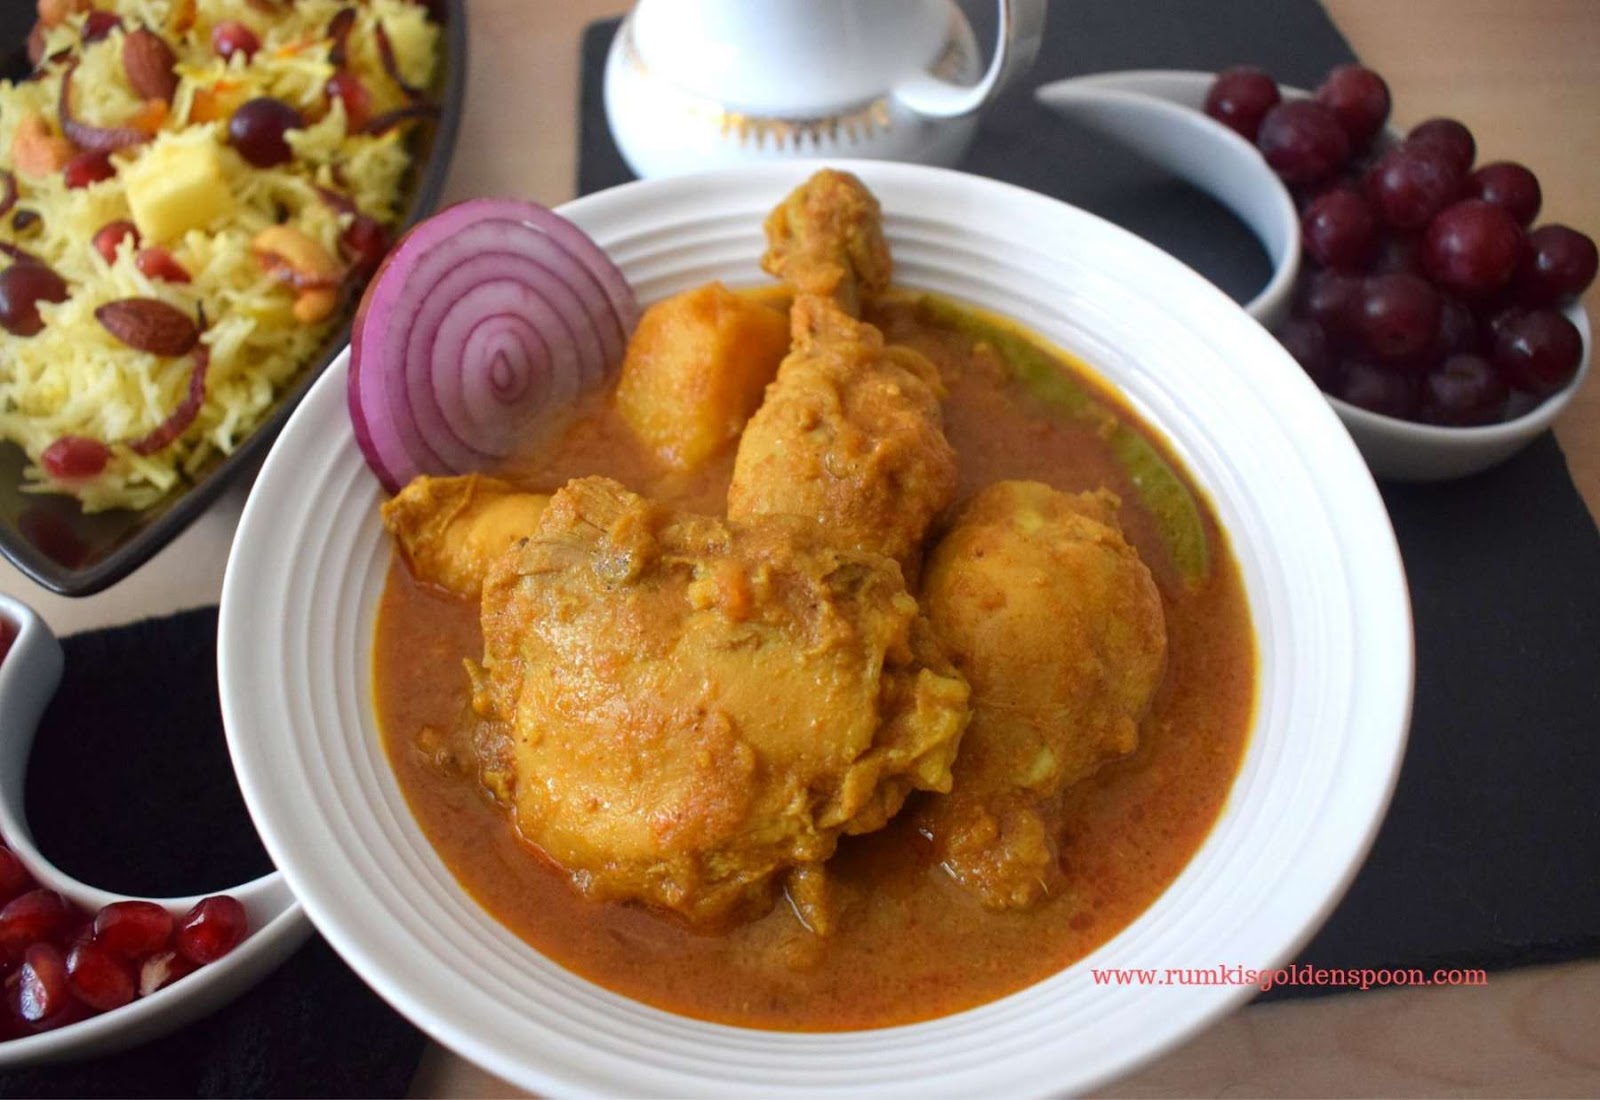 Chicken Curry recipes, Home-style chicken curry, Easy chicken curry, chicken curry recipe indian, authentic chicken curry recipes, spicy chicken curry recipes, Bengali chicken curry, chicken recipes, Indian recipes, Rumki's Golden Spoon